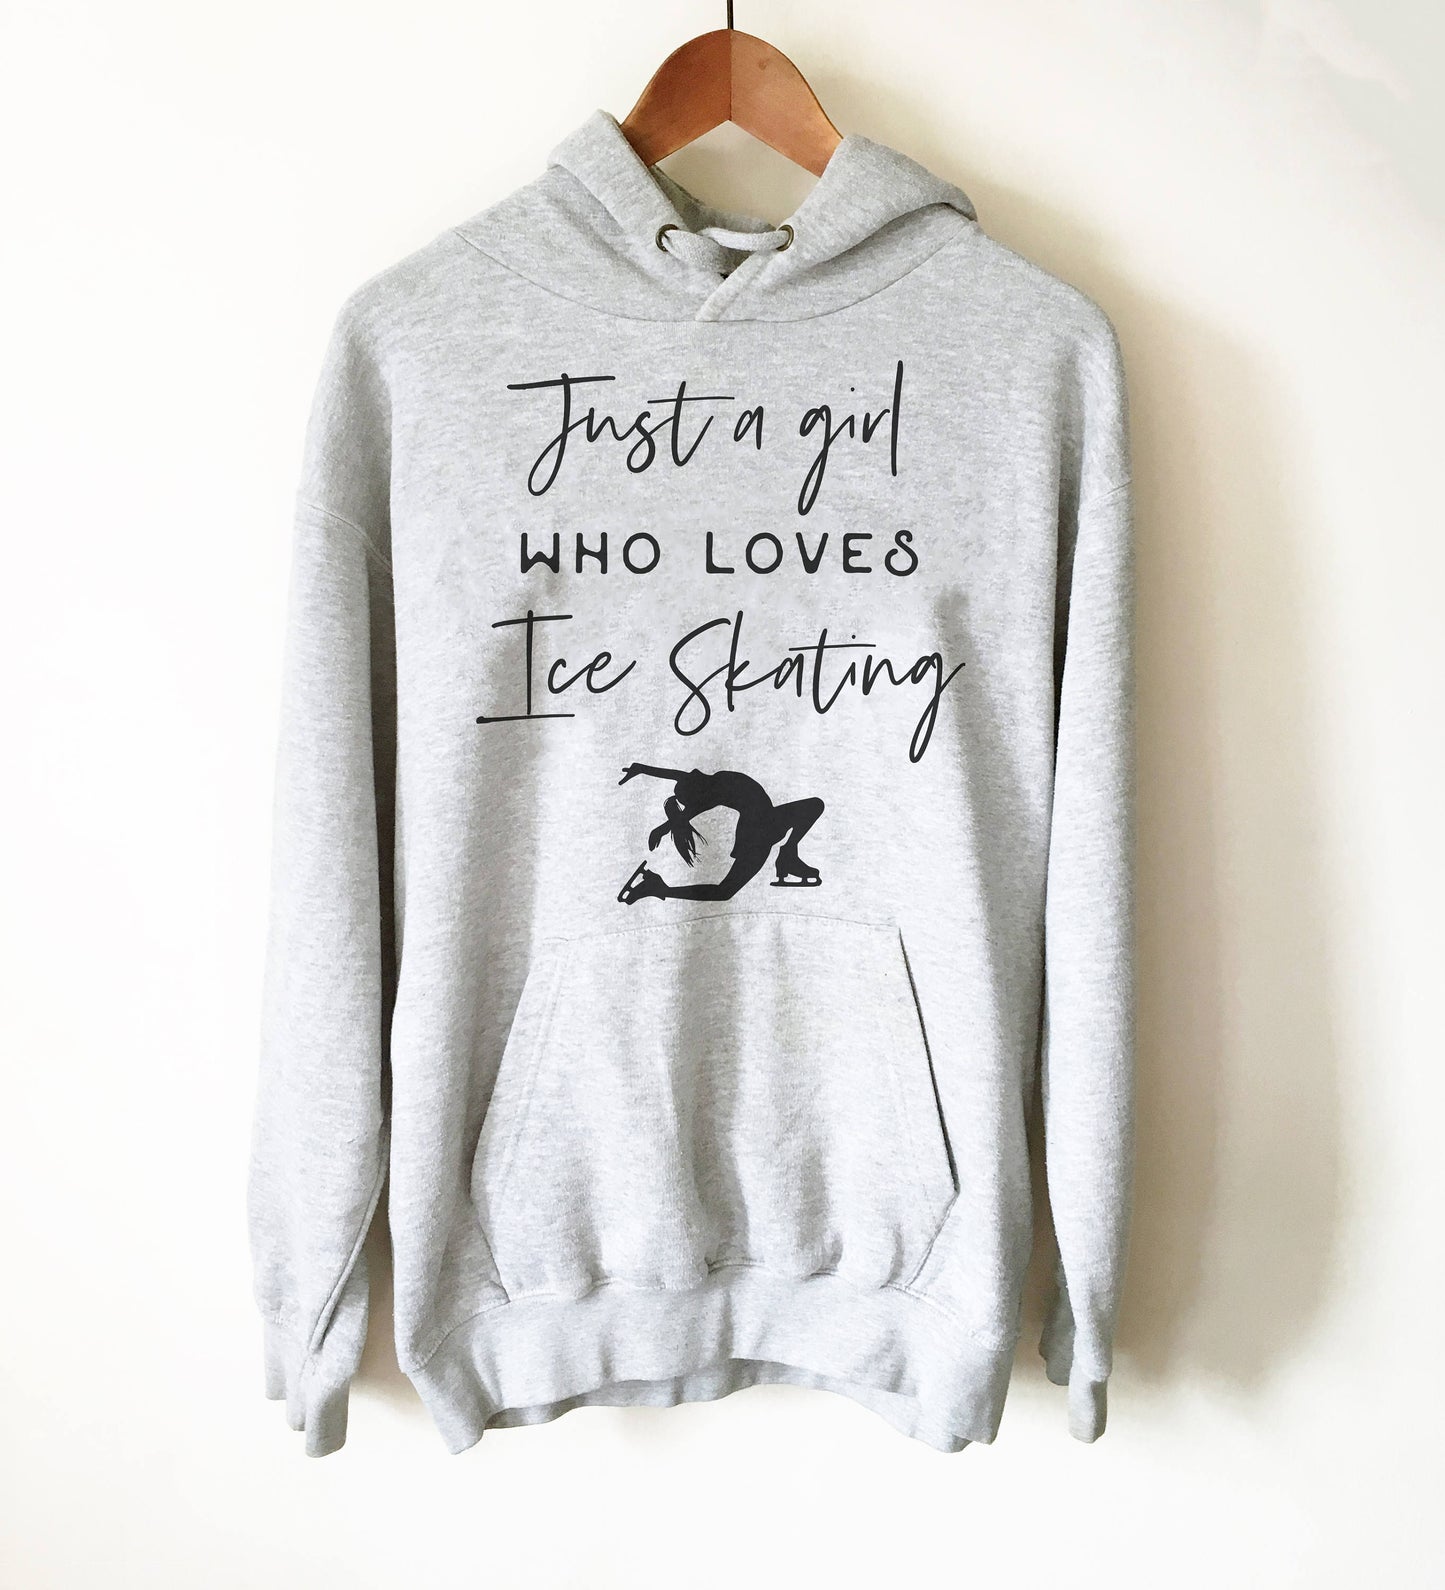 Just A Girl Who Loves Ice Skating Hoodie - Ice Skating Shirt, Figure Skating Shirt, Ice Skater Shirt, Ice Skating Coach, Skating Shirt